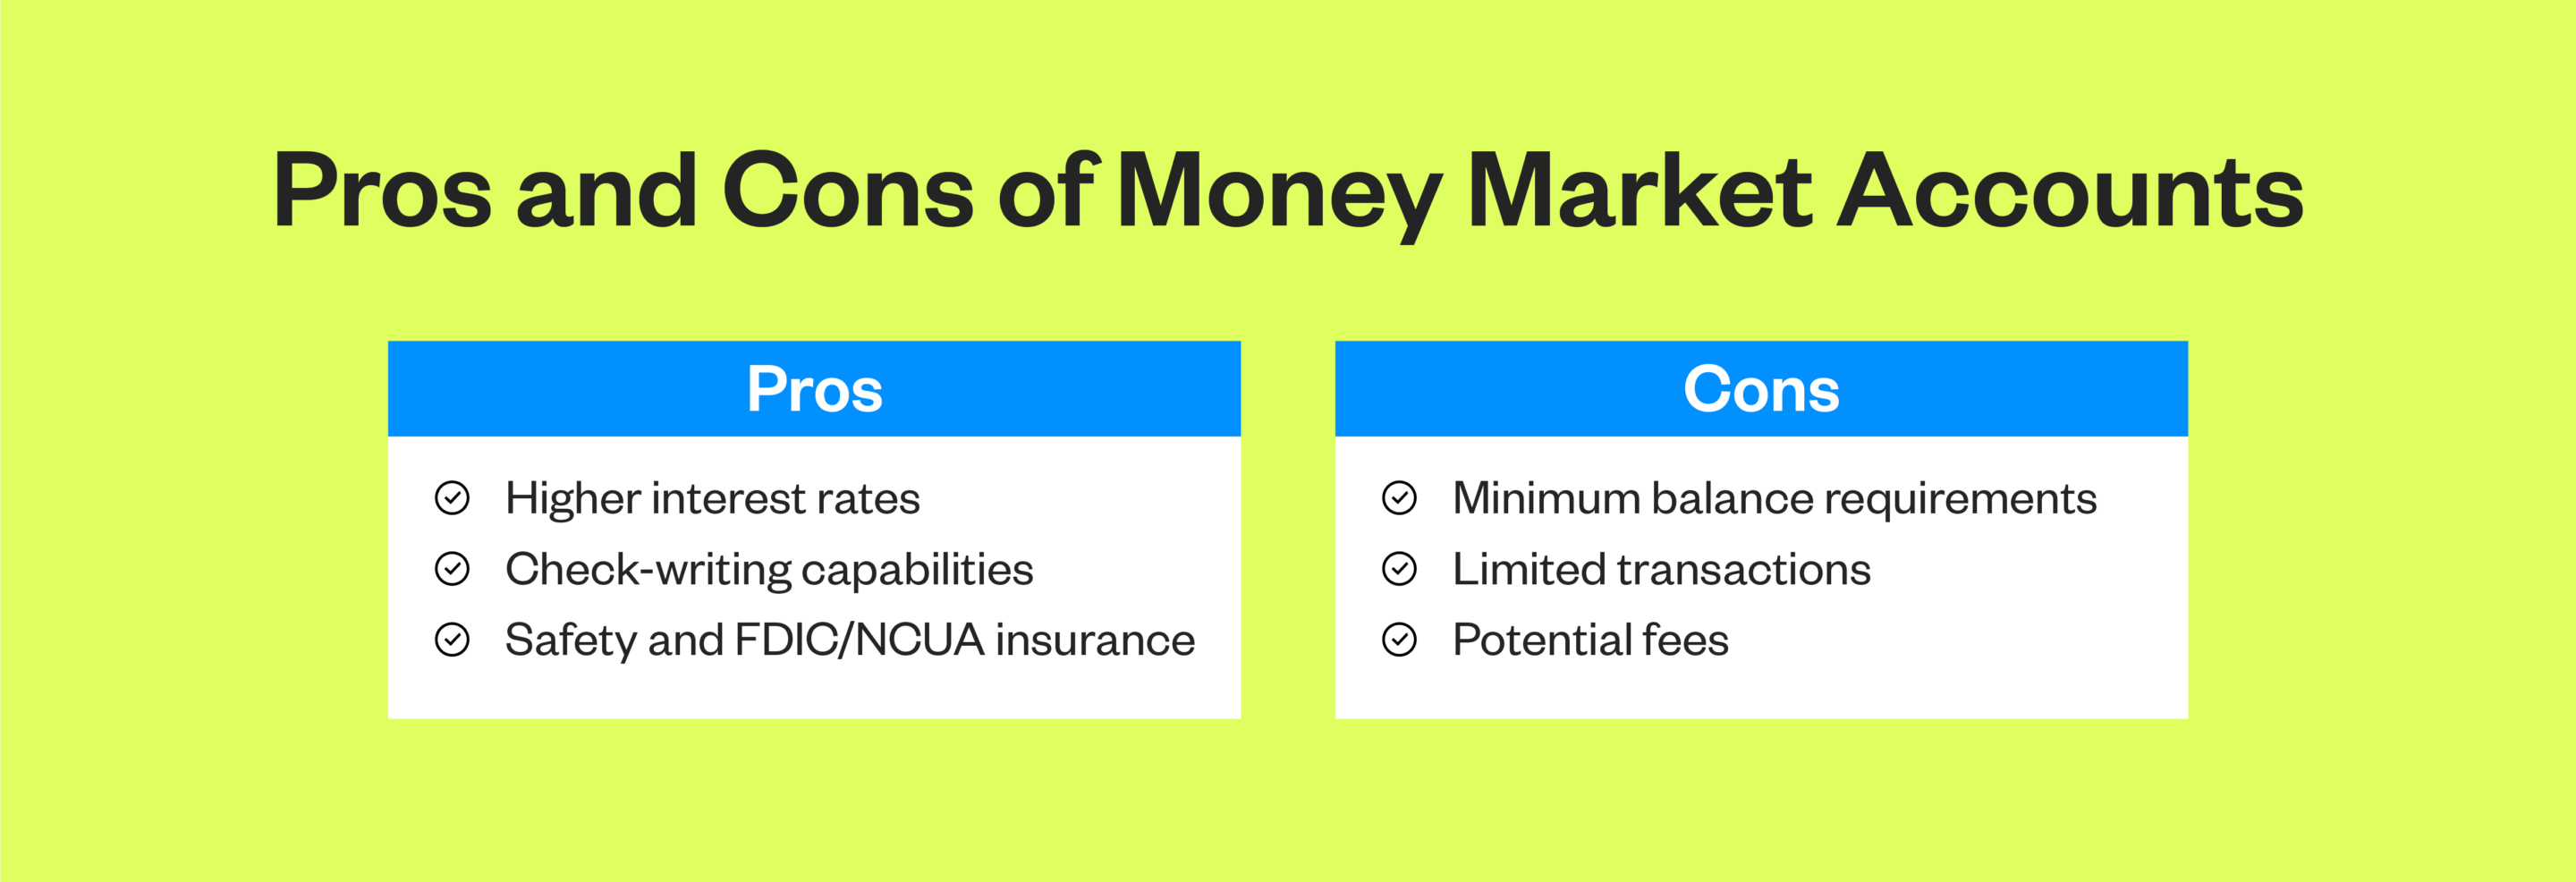 Pros and cons of money market accounts